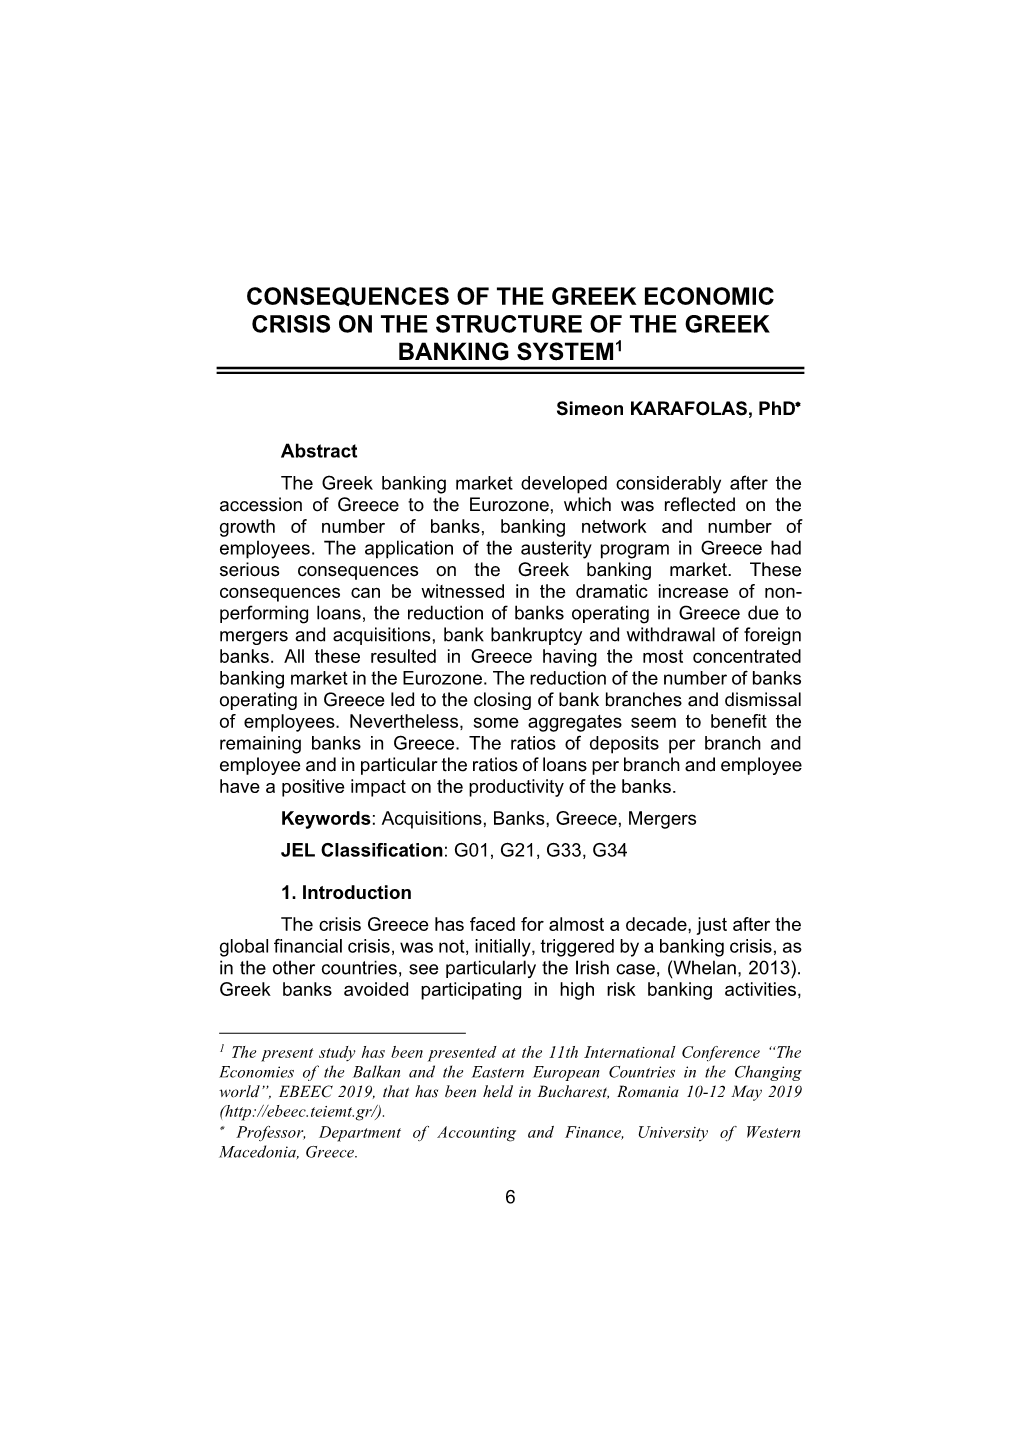 Consequences of the Greek Economic Crisis on the Structure of the Greek Banking System1